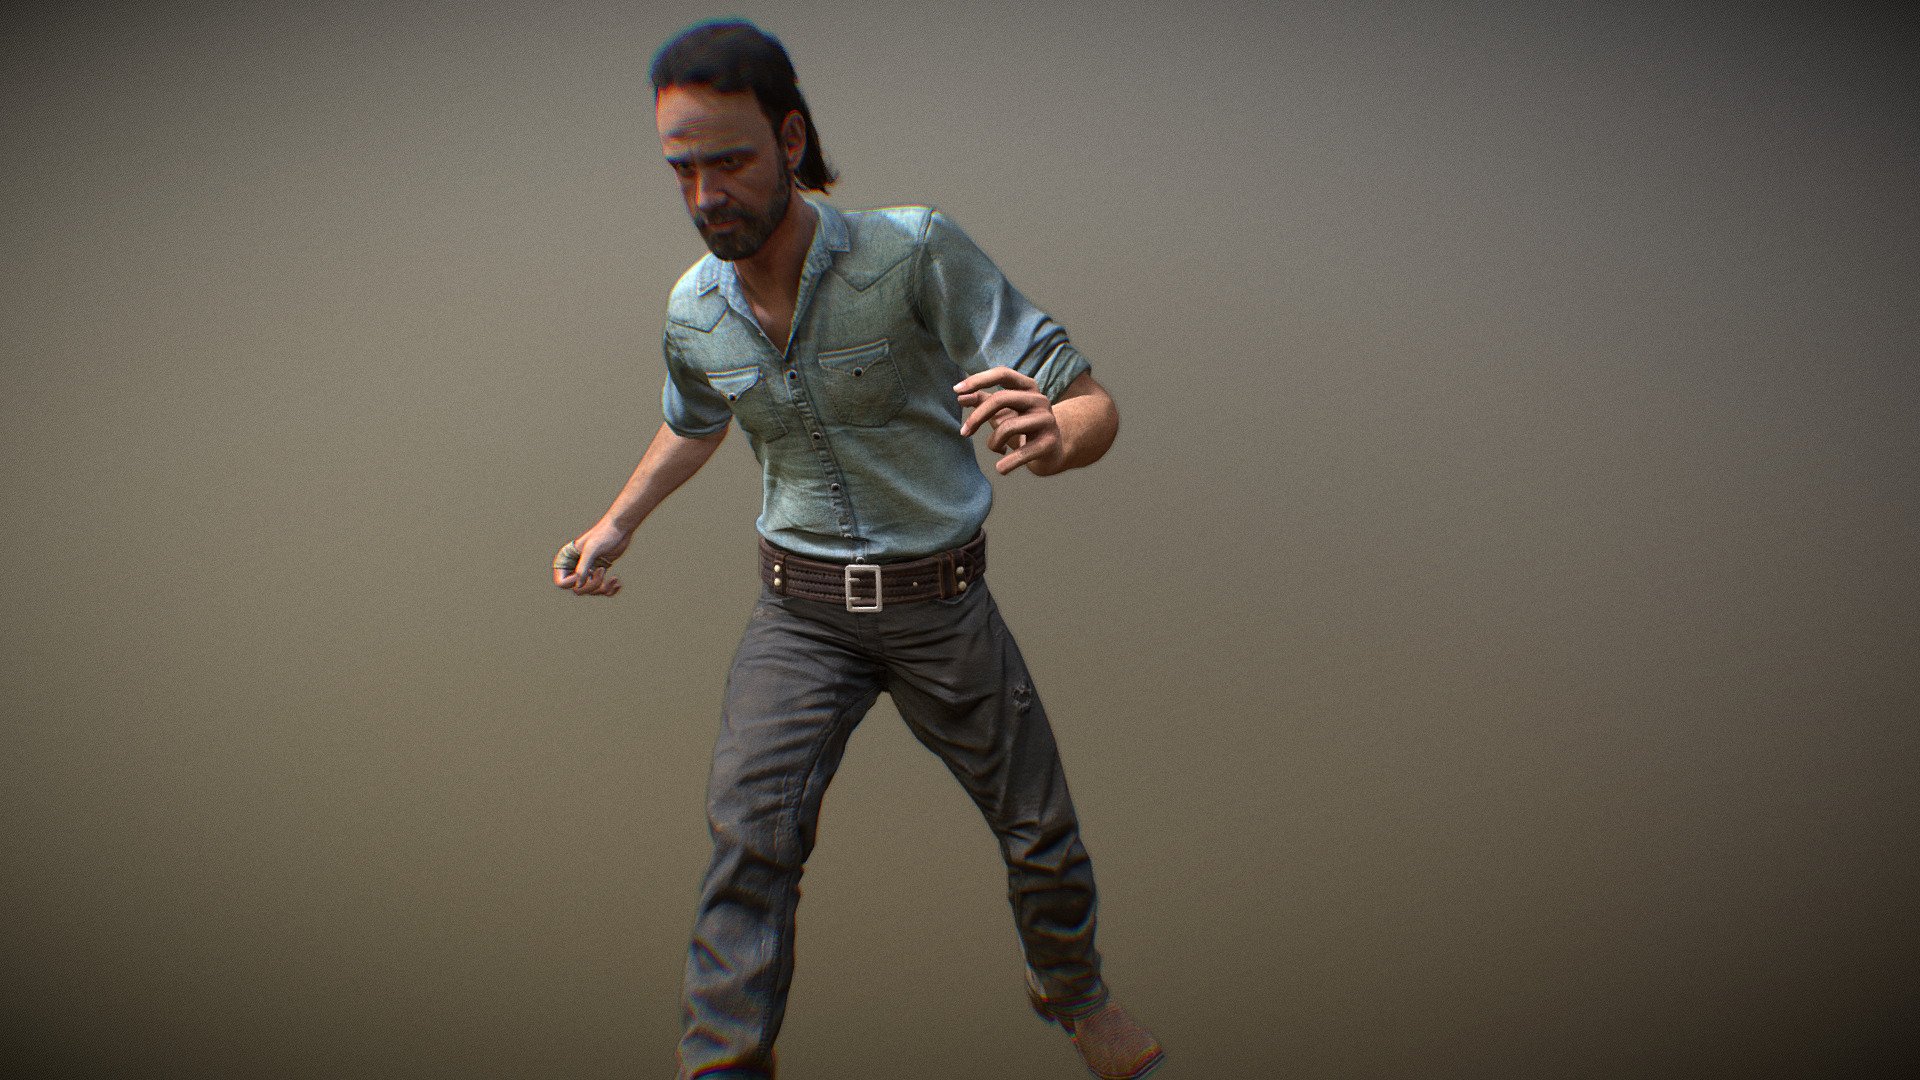 This is a rick grimes character model that has been re-rigged from a walking dead video game, we used mixamo to re-animate the character.
Not downloadable due copyrightial sanctions. Soon we shall include a UE4 rig to this model so it is easier to import it to the UE4 mannequin rig.

Contact us via: granddogstudiohelp@gmail.com

 - Rick Grimes (The Walking Dead) - 3D model by SanForge Studio (@SanForge) 3d model